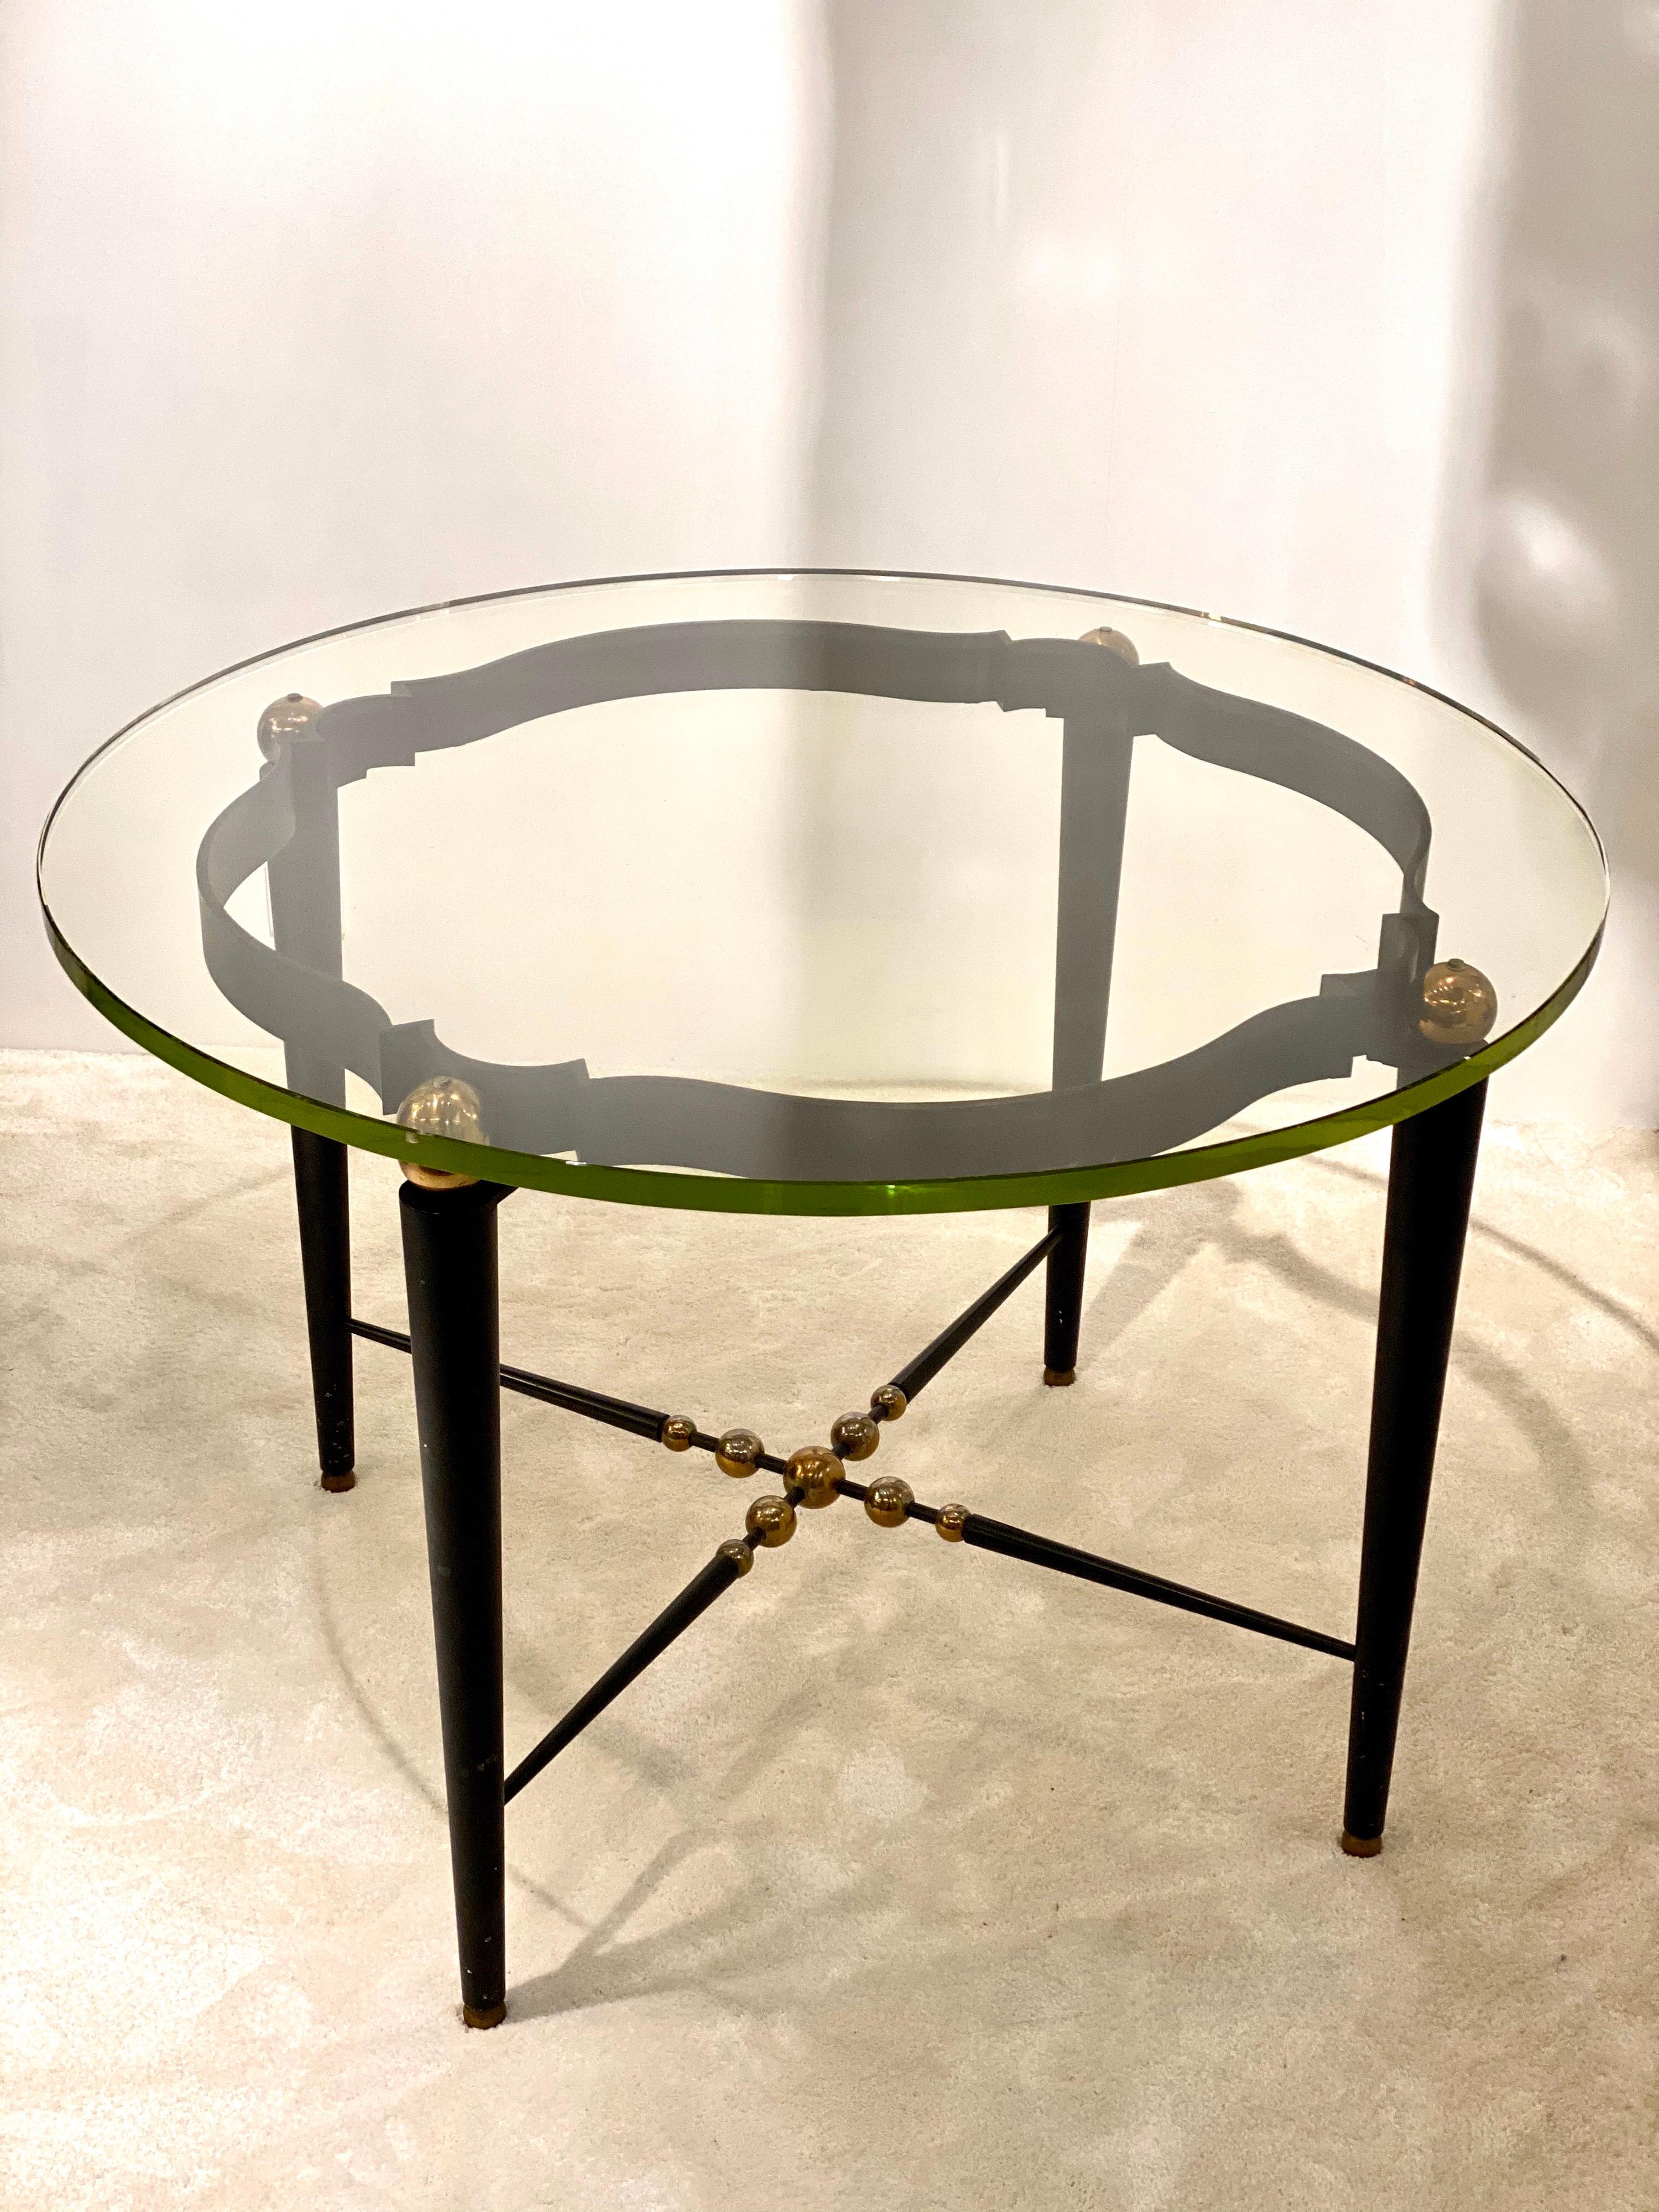 An elegant round Italian table made off wrought iron (base and legs), gold brass spheres and a thick Saint Gobain glass .
1940s style with a modern vibe due to the details, unusual, rare, perfect for Deco!